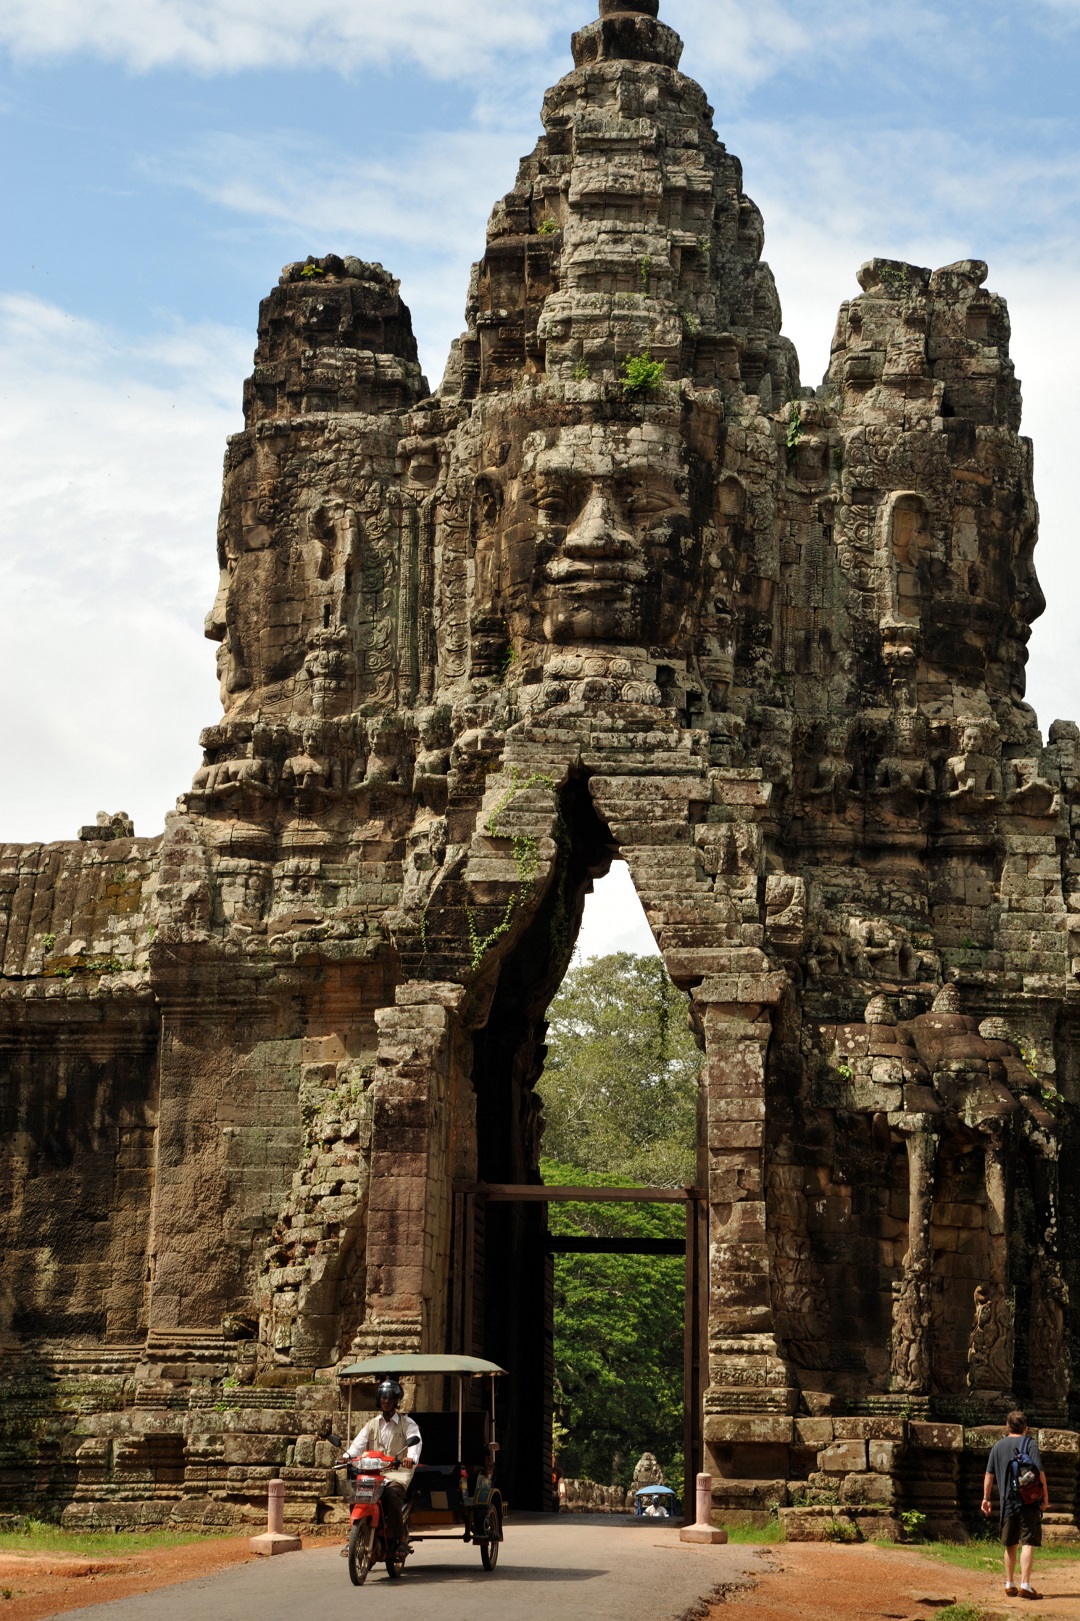 Northern Gate To The Bayon Temple Complex, With 4 Giant Faces. Cambodia, Khmer Empire, 12th-13th Century